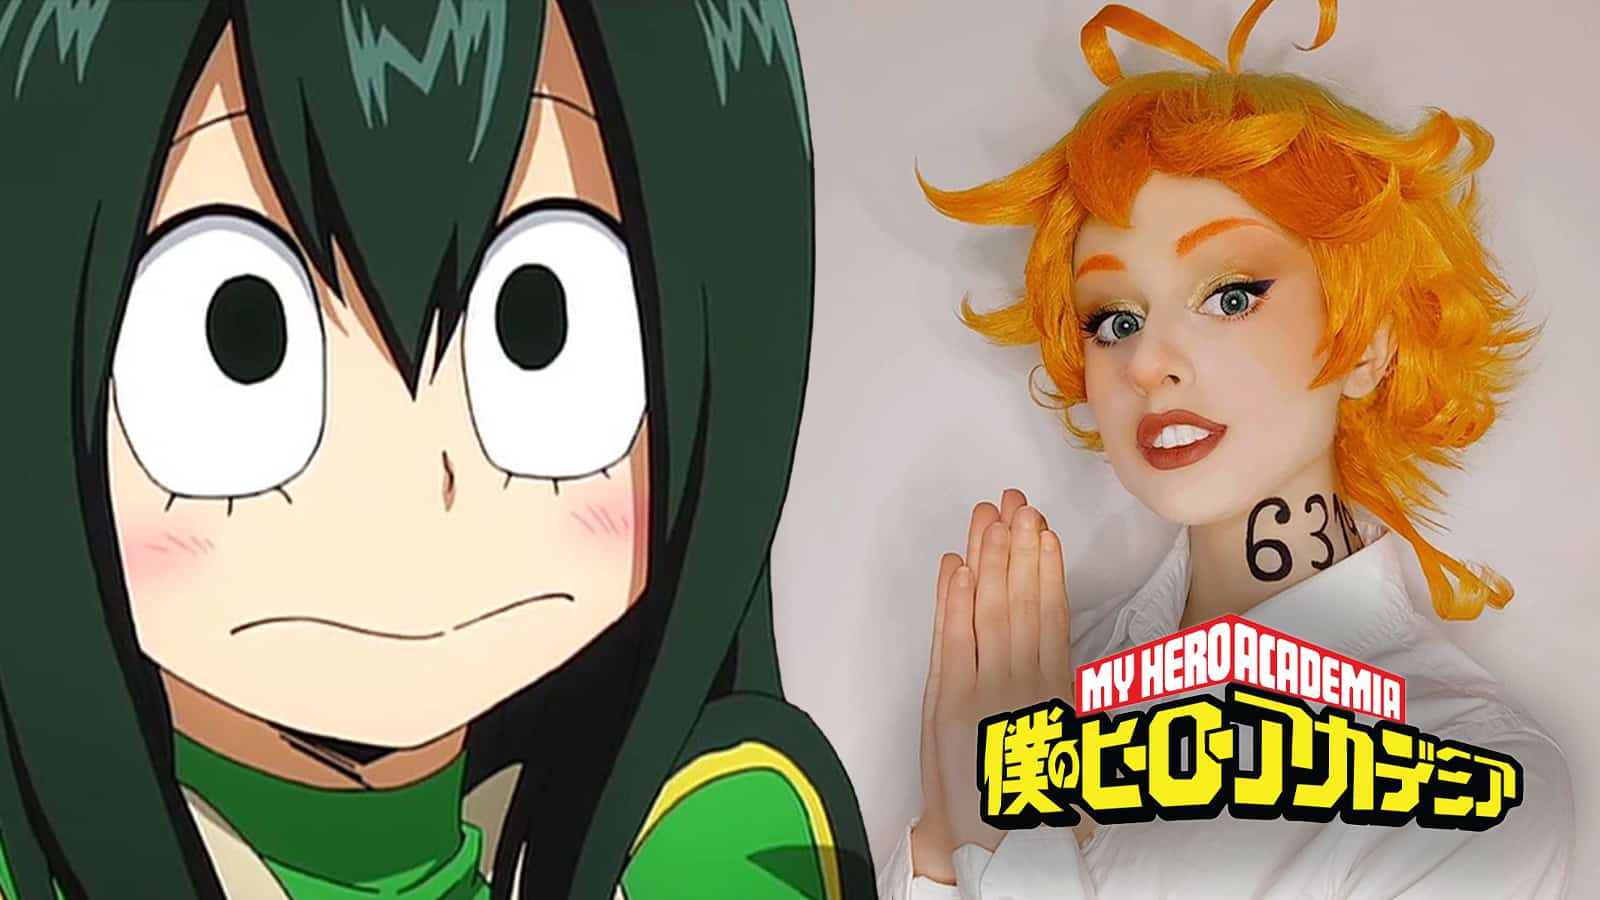 My Hero Academia Froppy cosplay by TaiMun